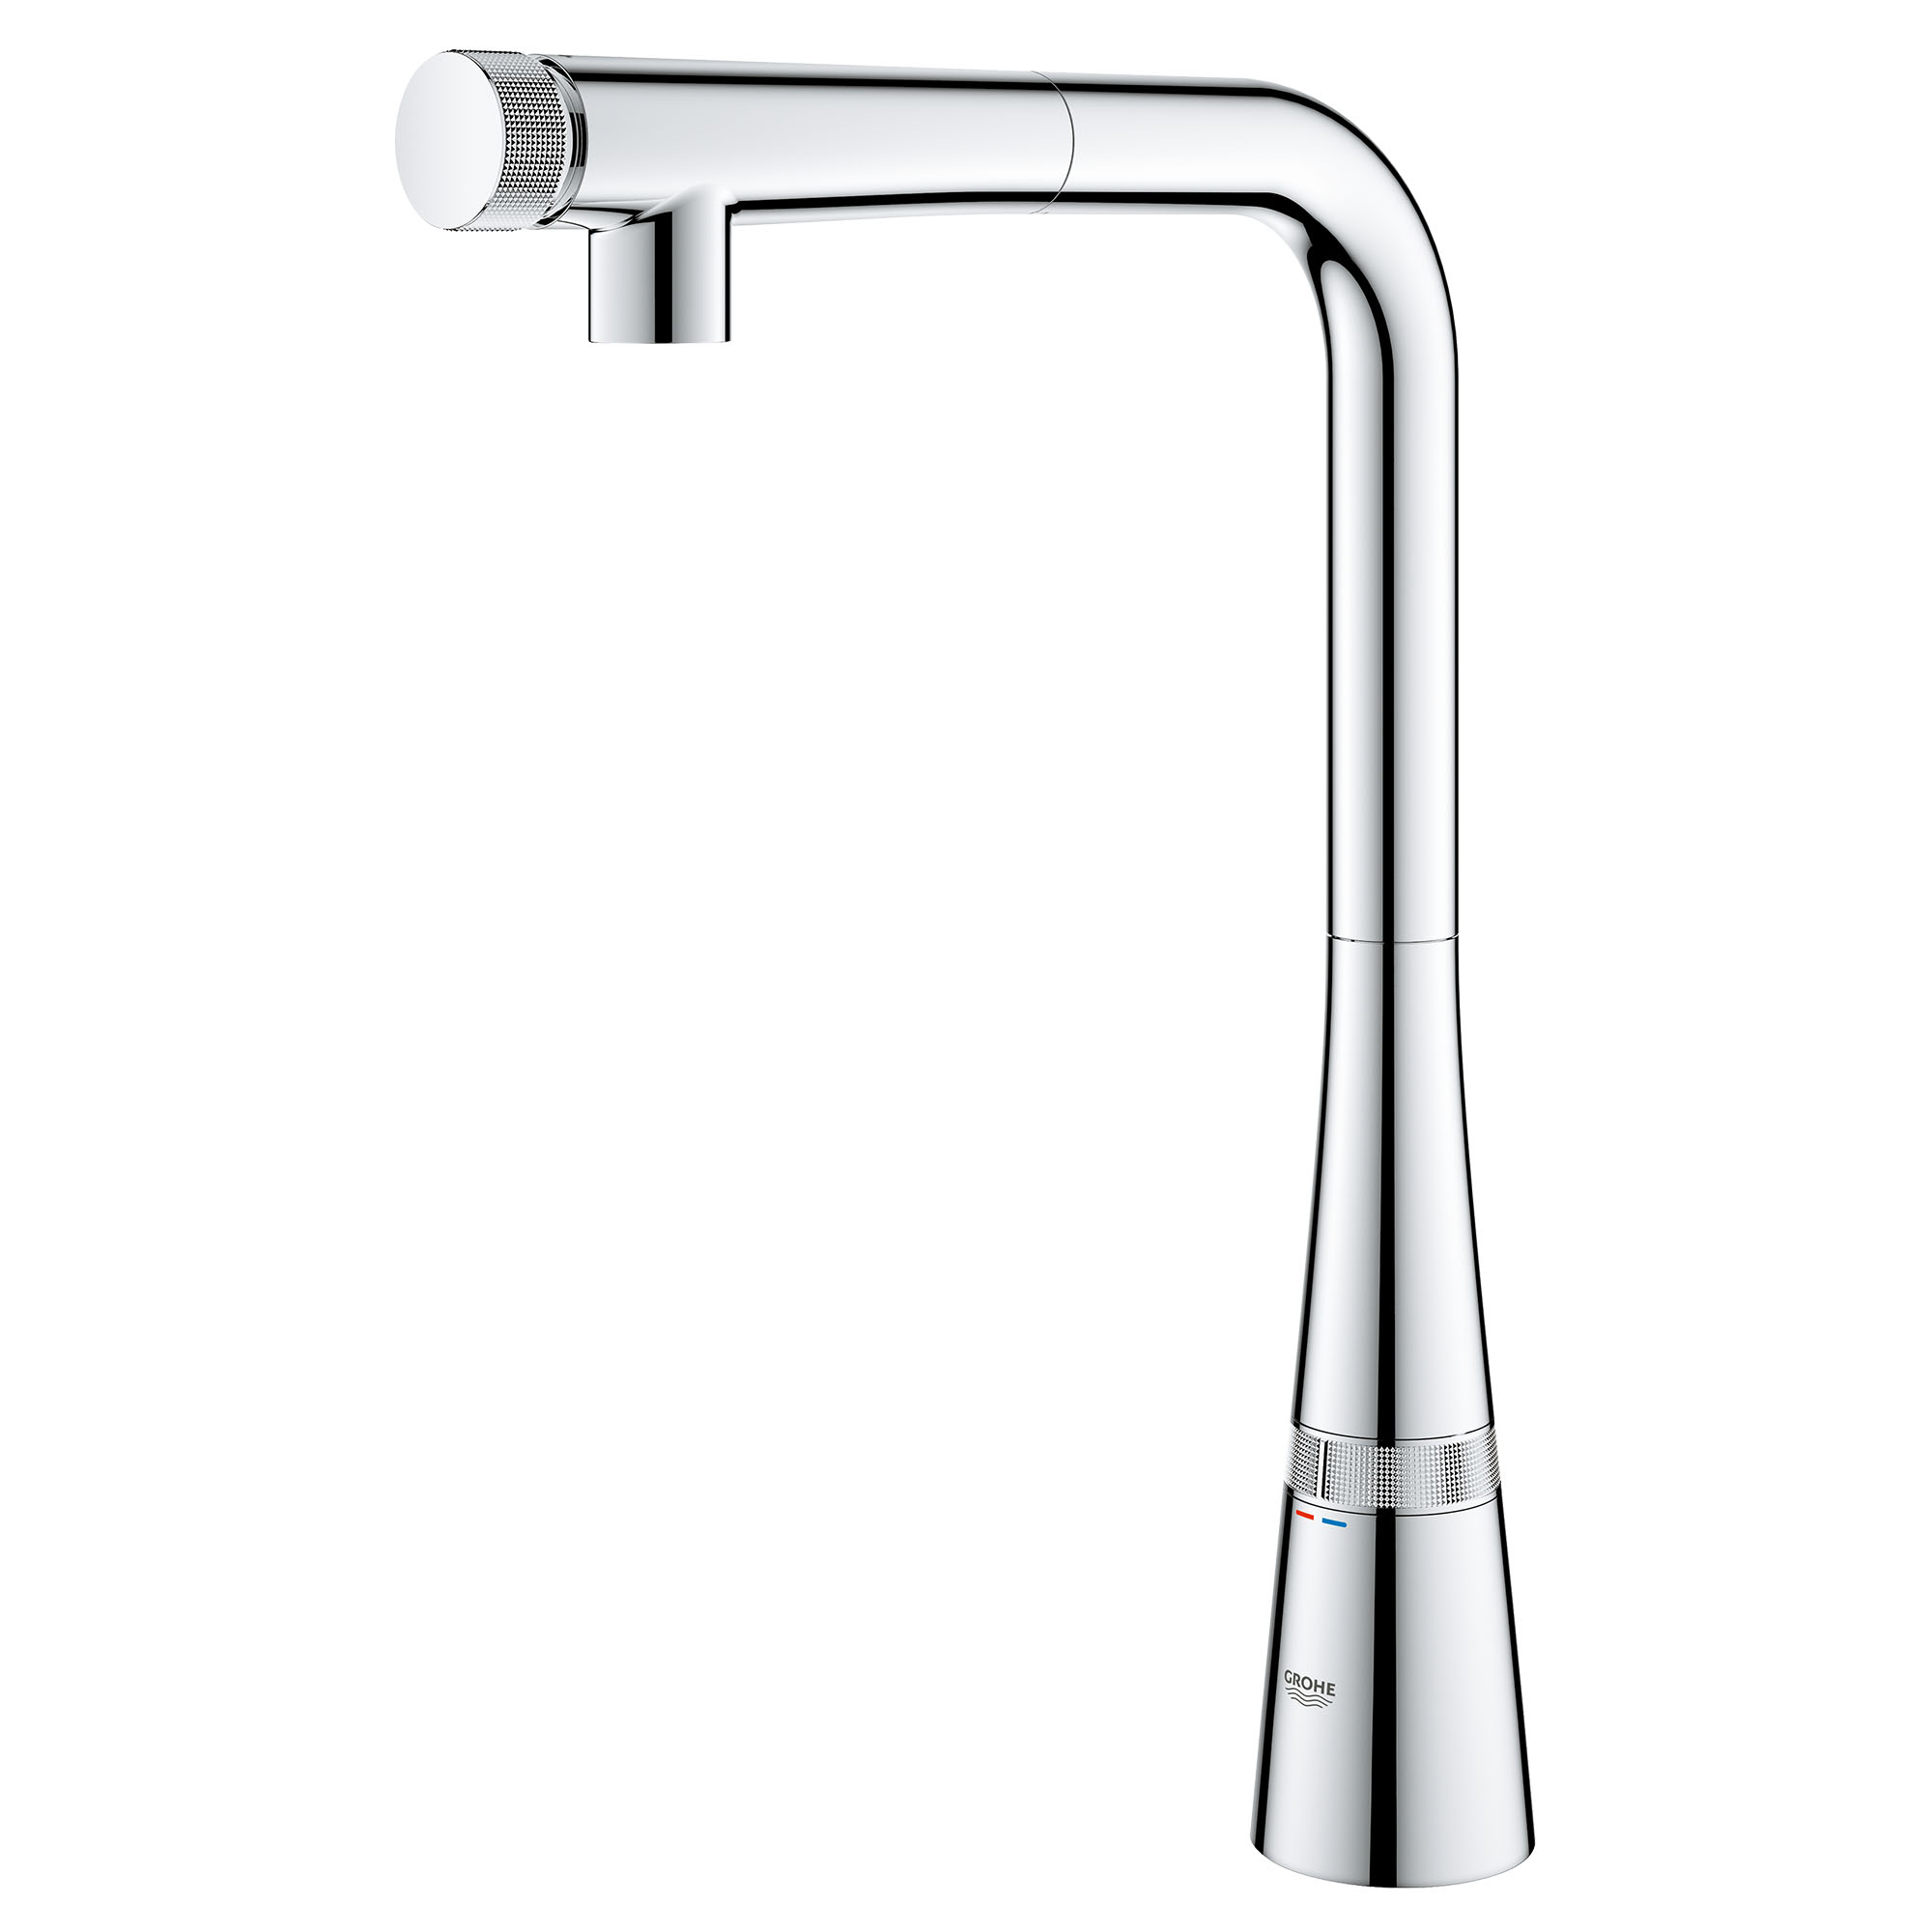 SmartControl Pull-Out Single Spray Kitchen Faucet 1.75 GPM